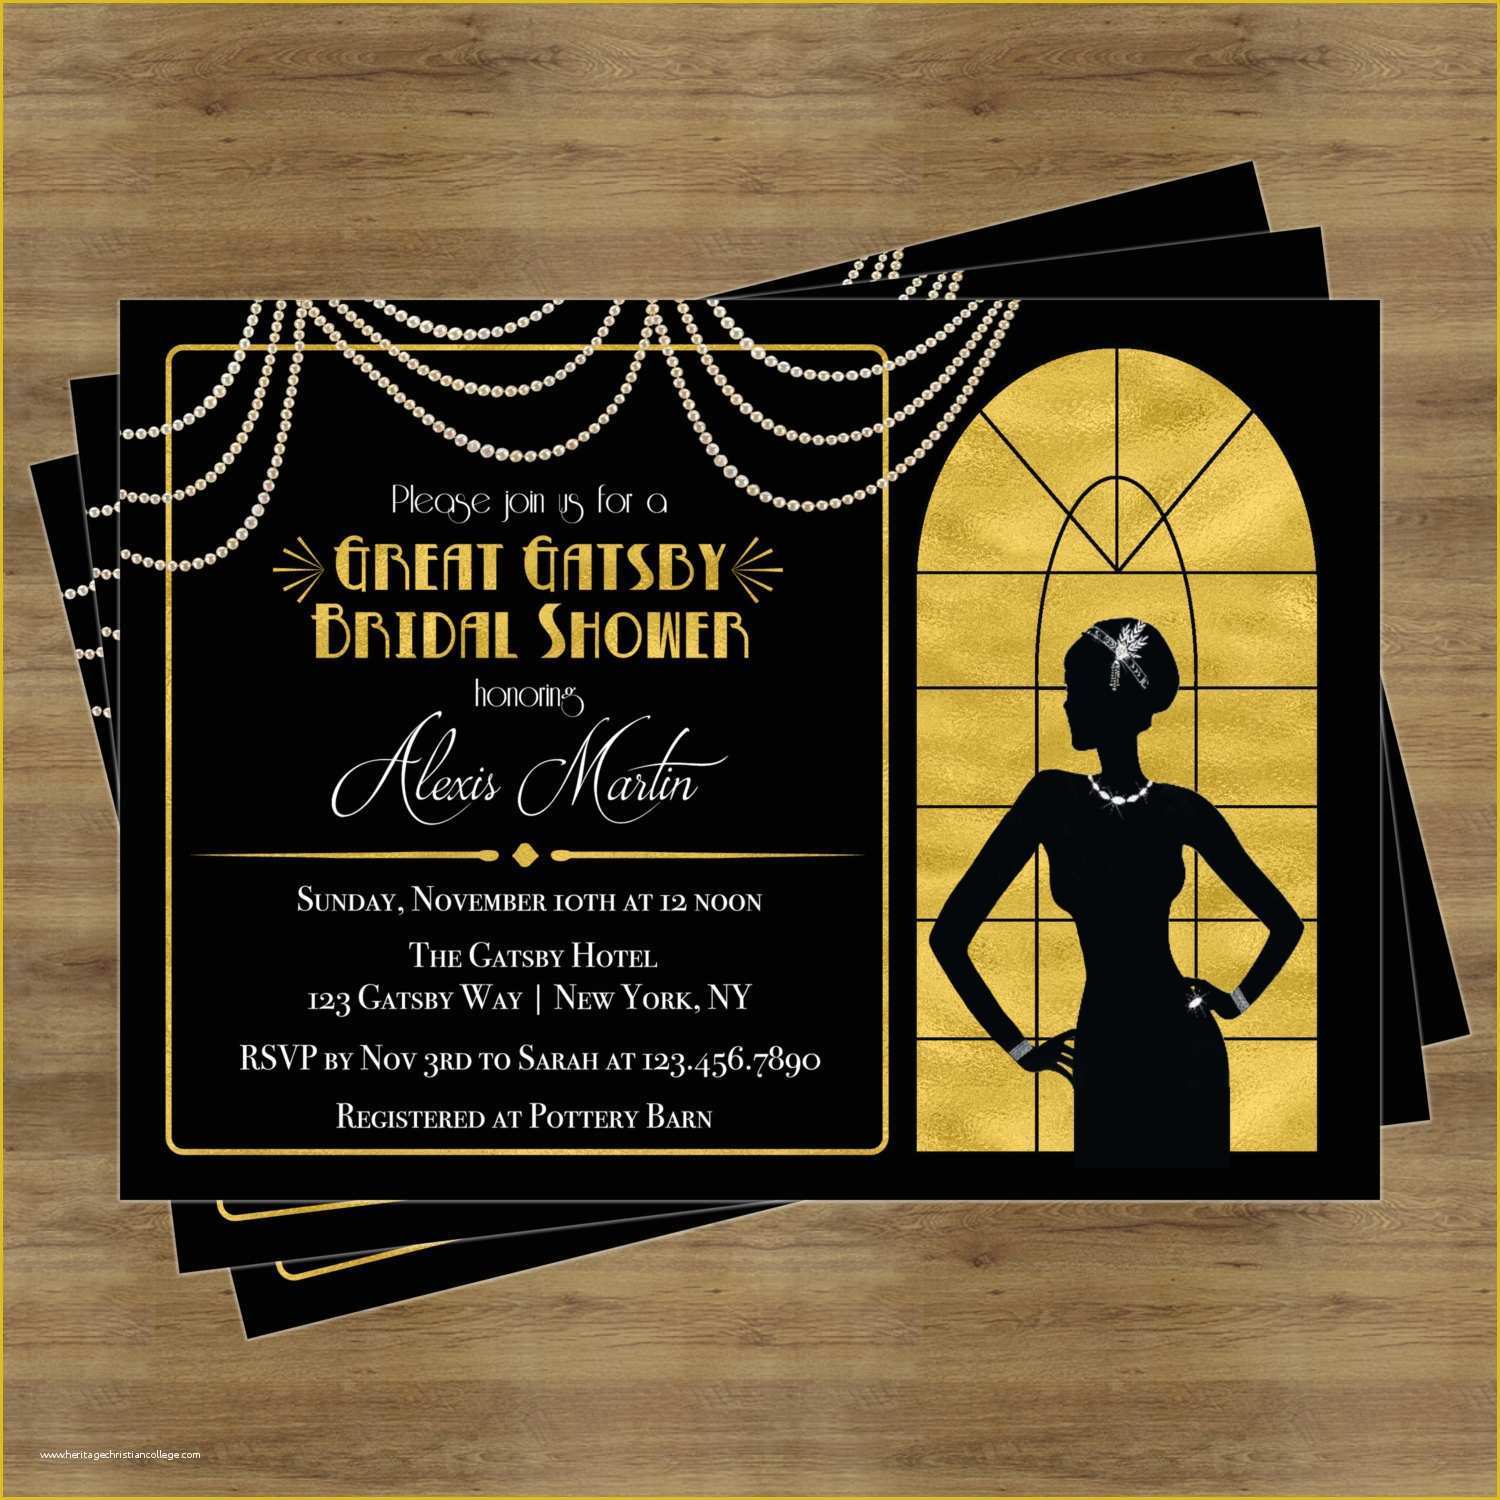 1920s Party Invitation Template Free Of Great Gatsby Invitation Gatsby Bridal Shower Invitation